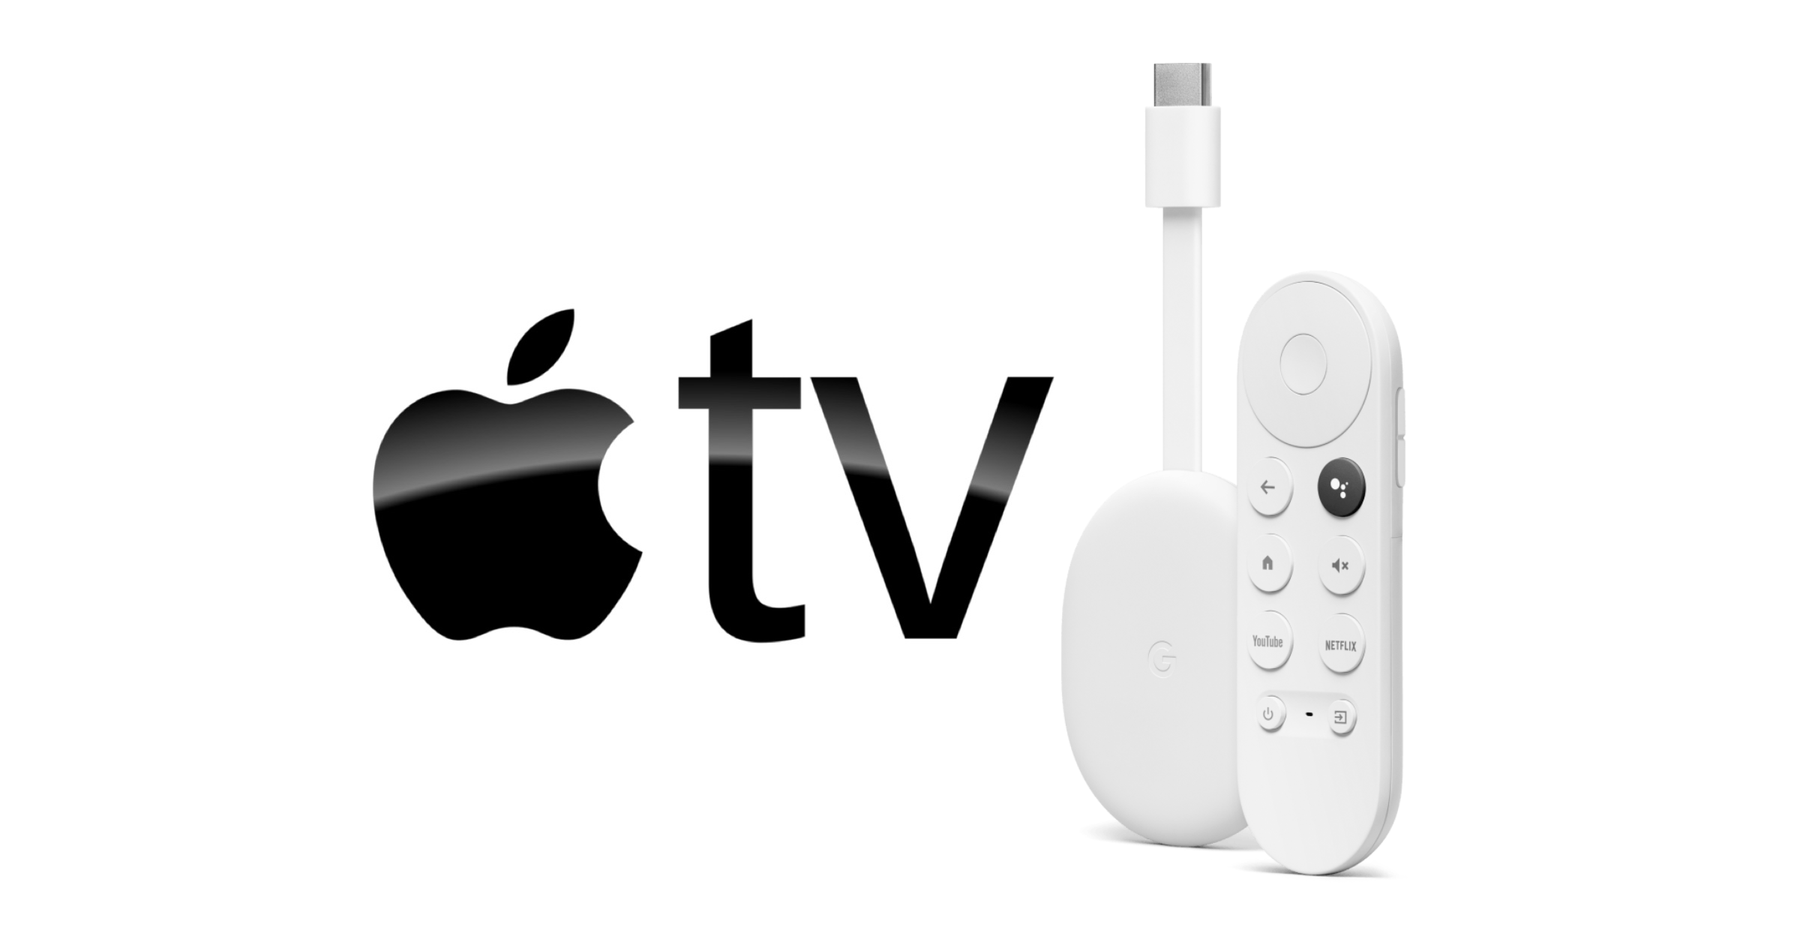 The Apple TV app is on its way to Chromecast with Google TV